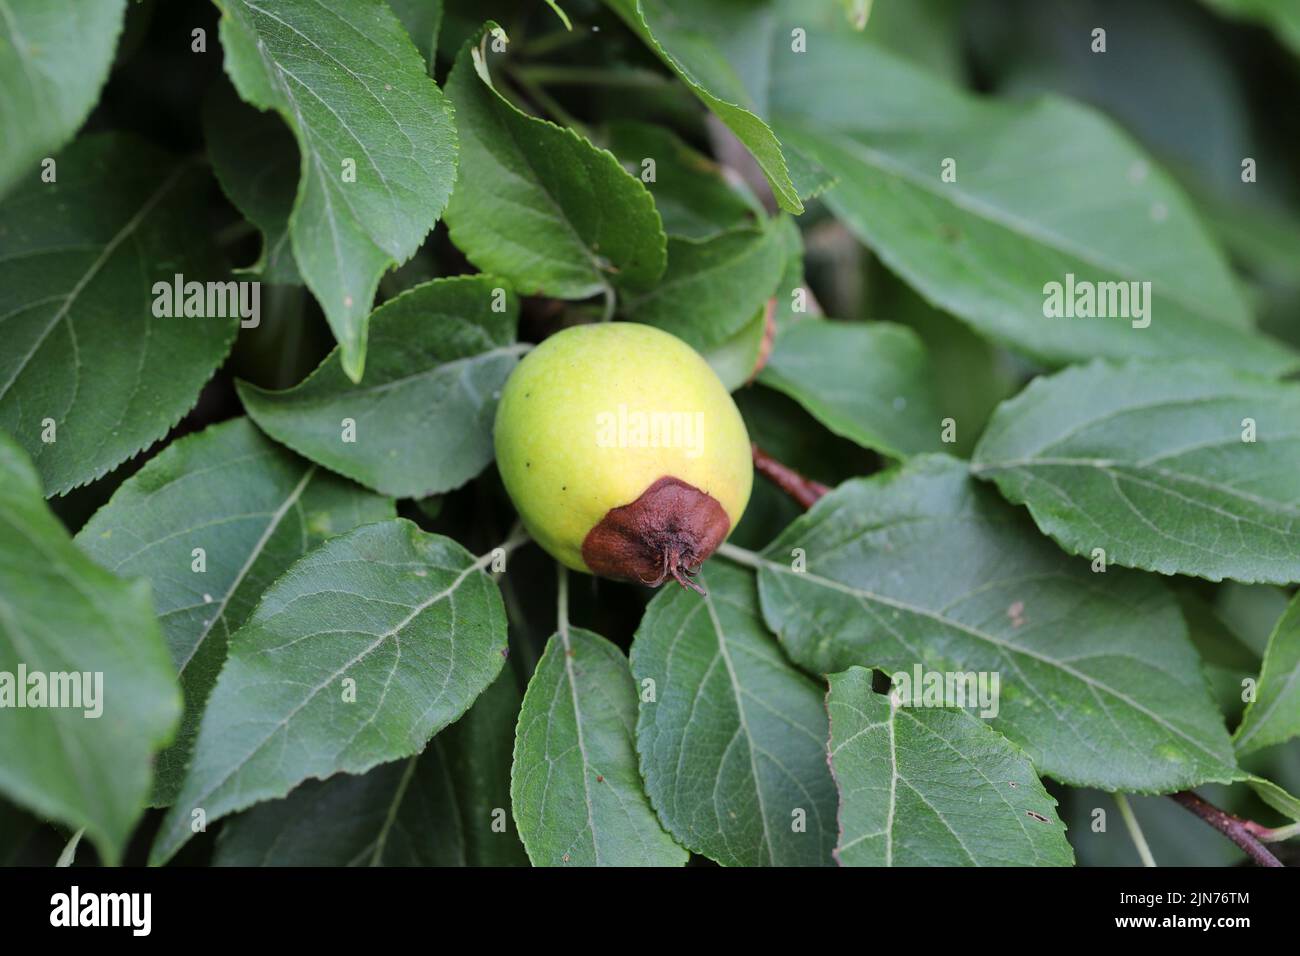 A rotting apple on a tree in an apple orchard. Apple tree disease. Stock Photo